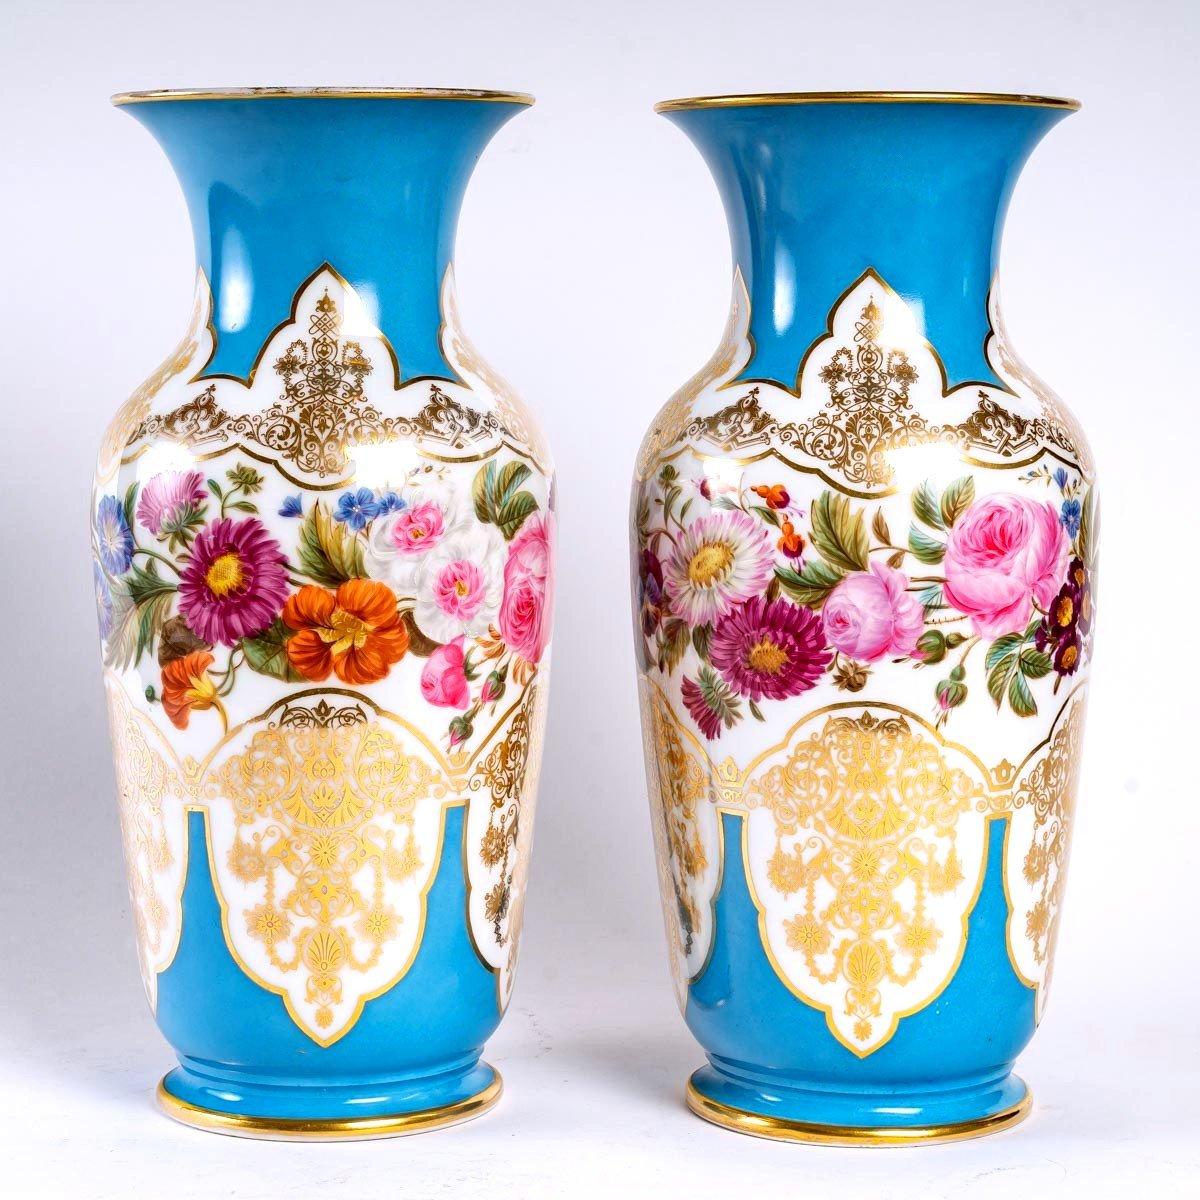 Pair of porcelain vases, late 19th century
A pair of porcelain vases with flowers on a gold and blue background, late 19th century
Measures: H: 32.5 cm, D: 16 cm.
    